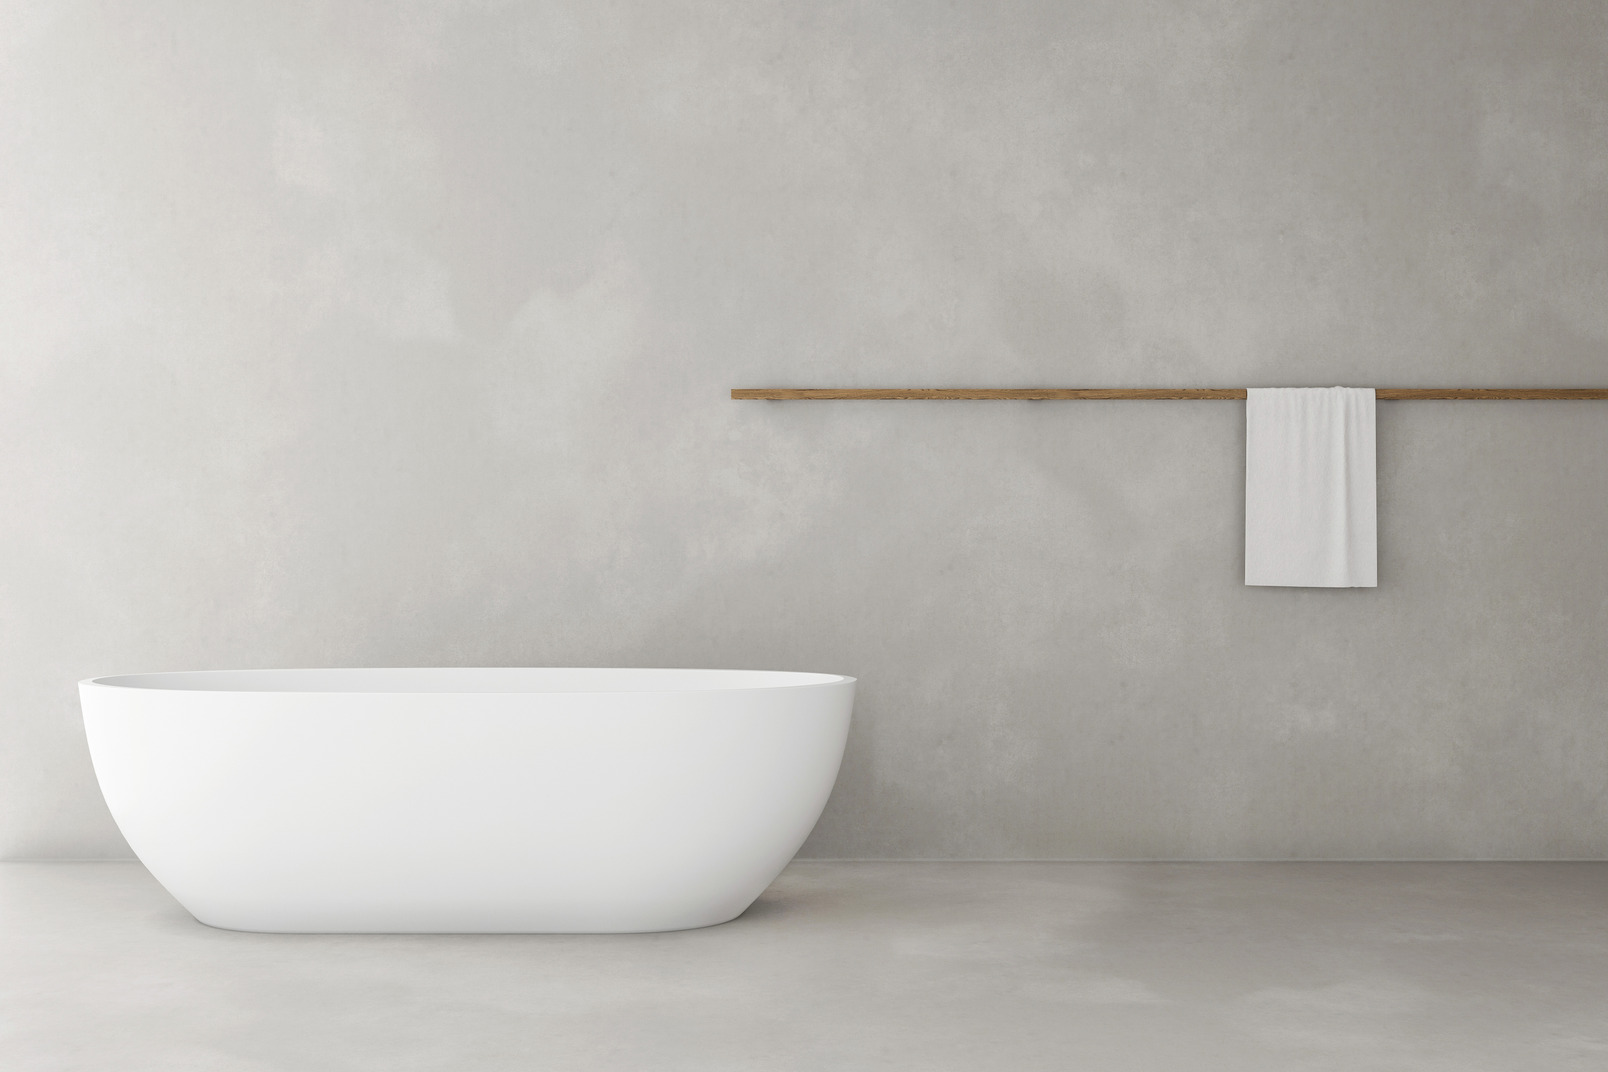 A minimalistic bathroom with a single-standing white oval bathtub and a single white towel on the wall